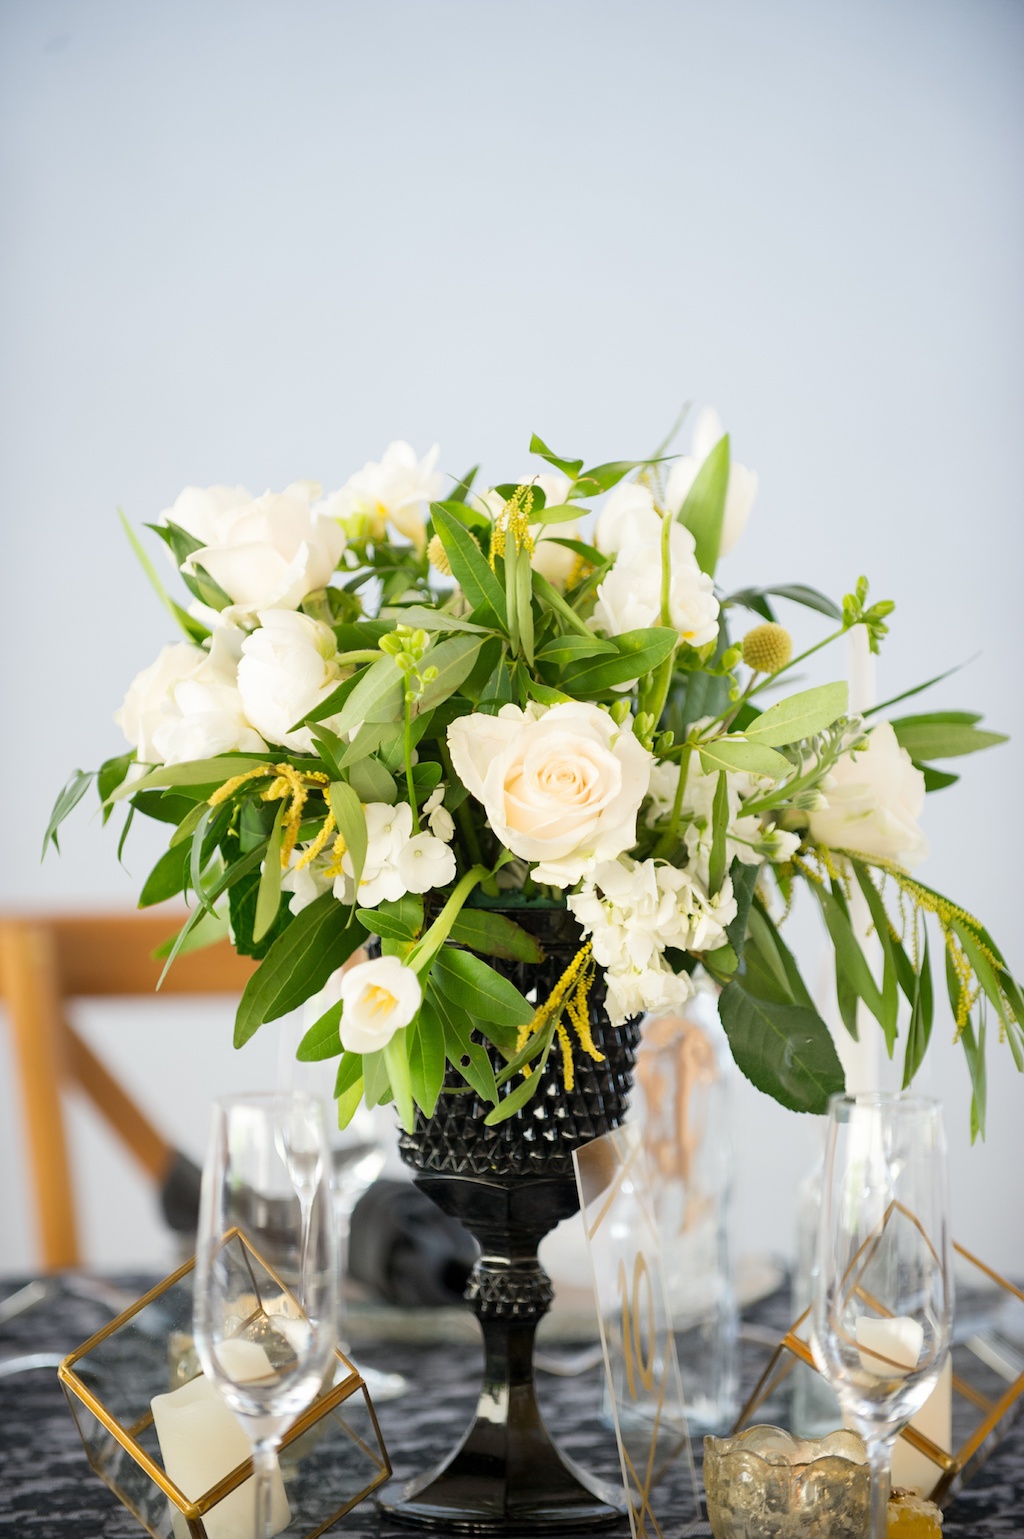 Modern, Geometric Bumble Inspired, Wedding Decor, Low Floral Centerpiece, Yellow Accents, White, Blush Pink Roses, Greenery, in Black Base, Gold Geometric Wedding Decor | Tampa Bay Wedding Photographer Andi Diamond Photography